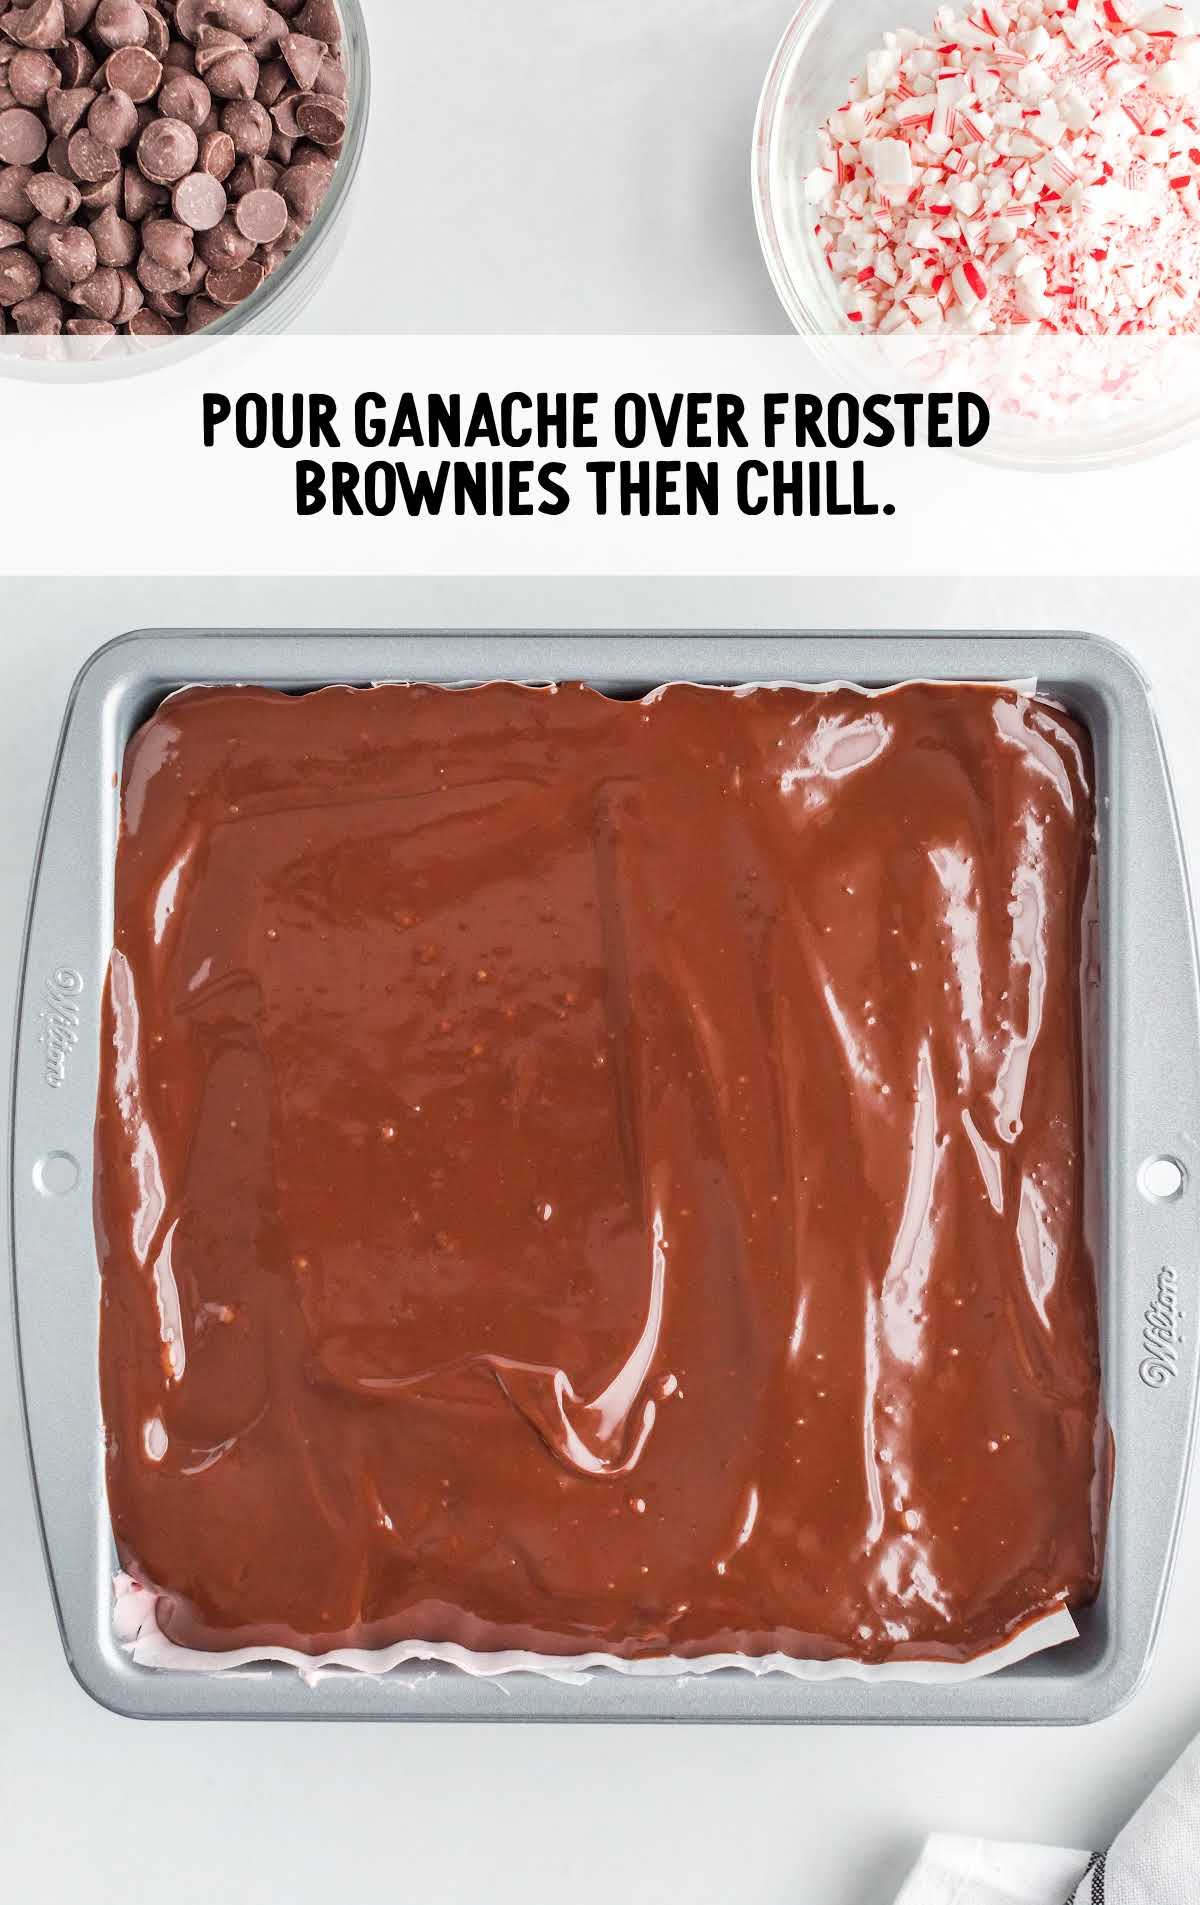 ganche poured over the frosted brownies in a baking dish